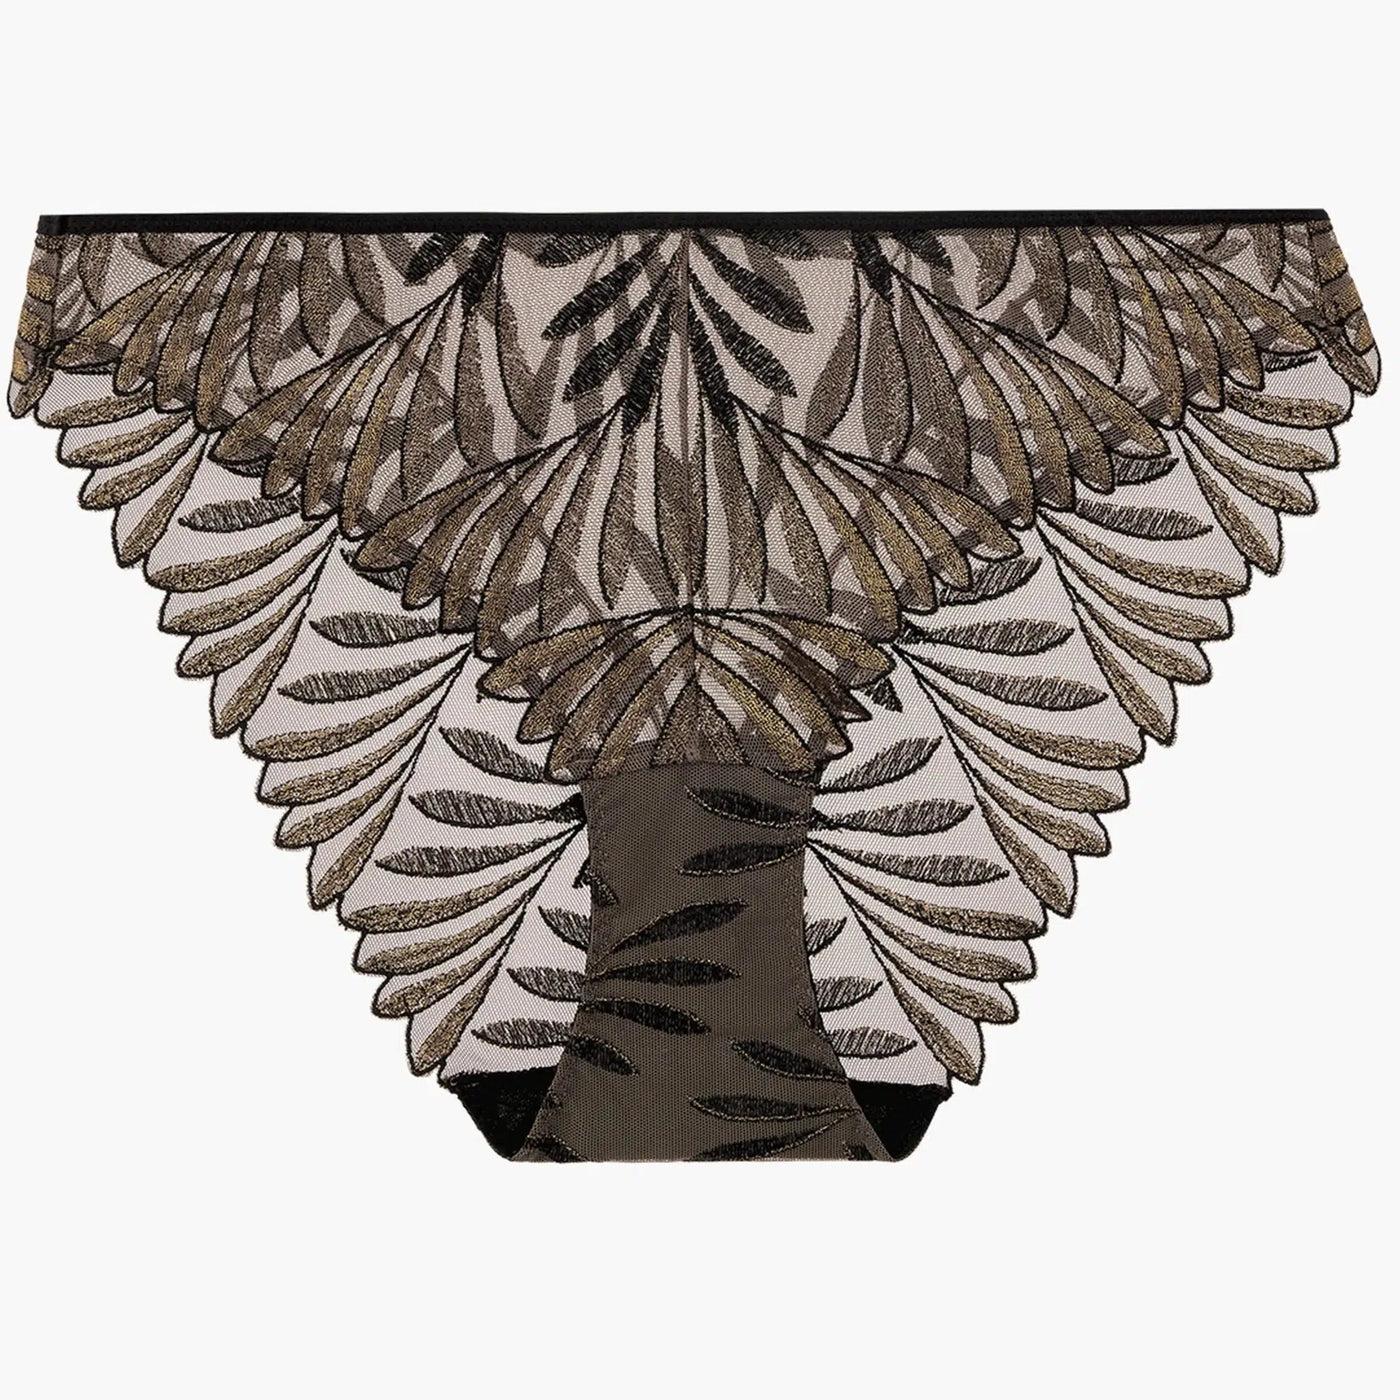 Aubade Sensory Illusion Italian Brief RC27-Panties-Aubade-Golden Leaves-Small-Anna Bella Fine Lingerie, Reveal Your Most Gorgeous Self!